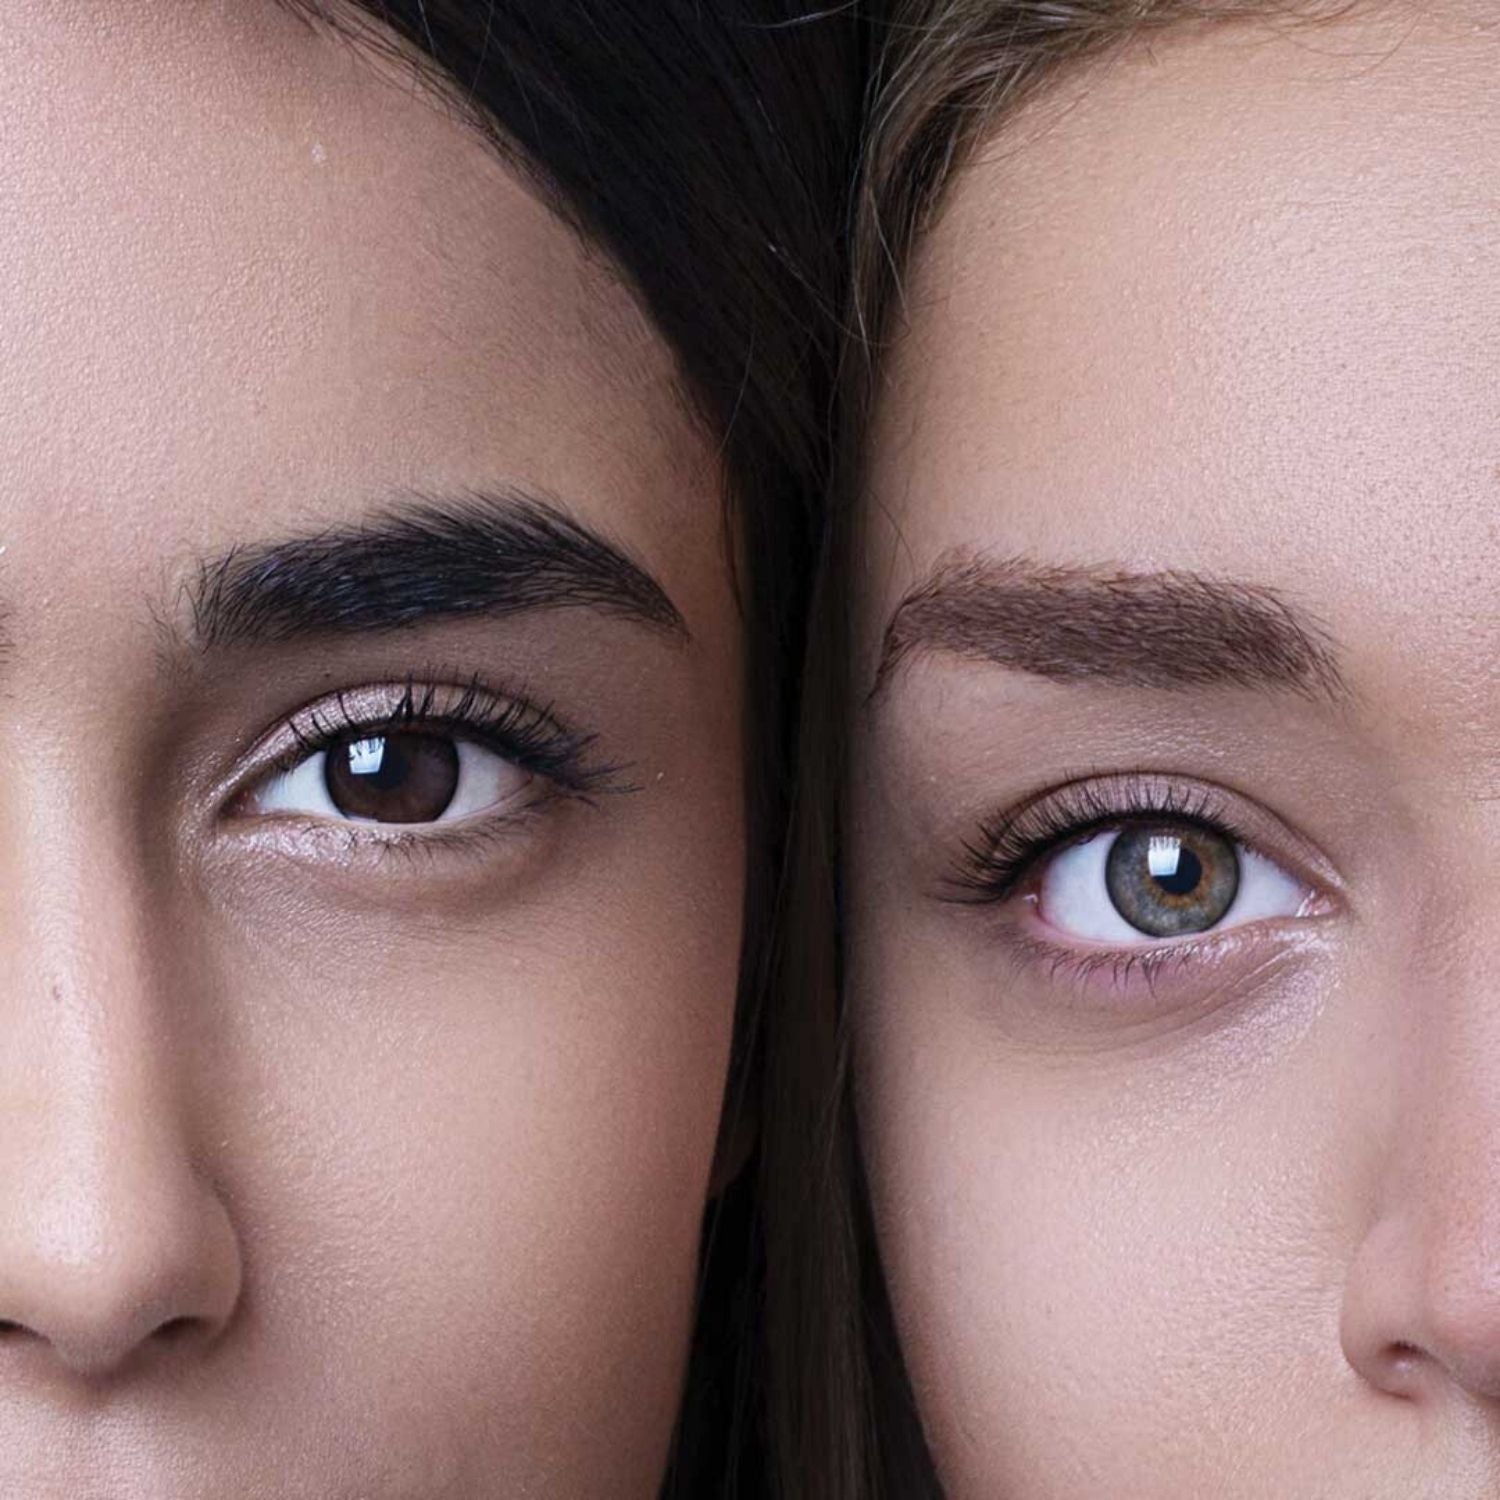 close up with two models eyebrows after using brow pencil and gel